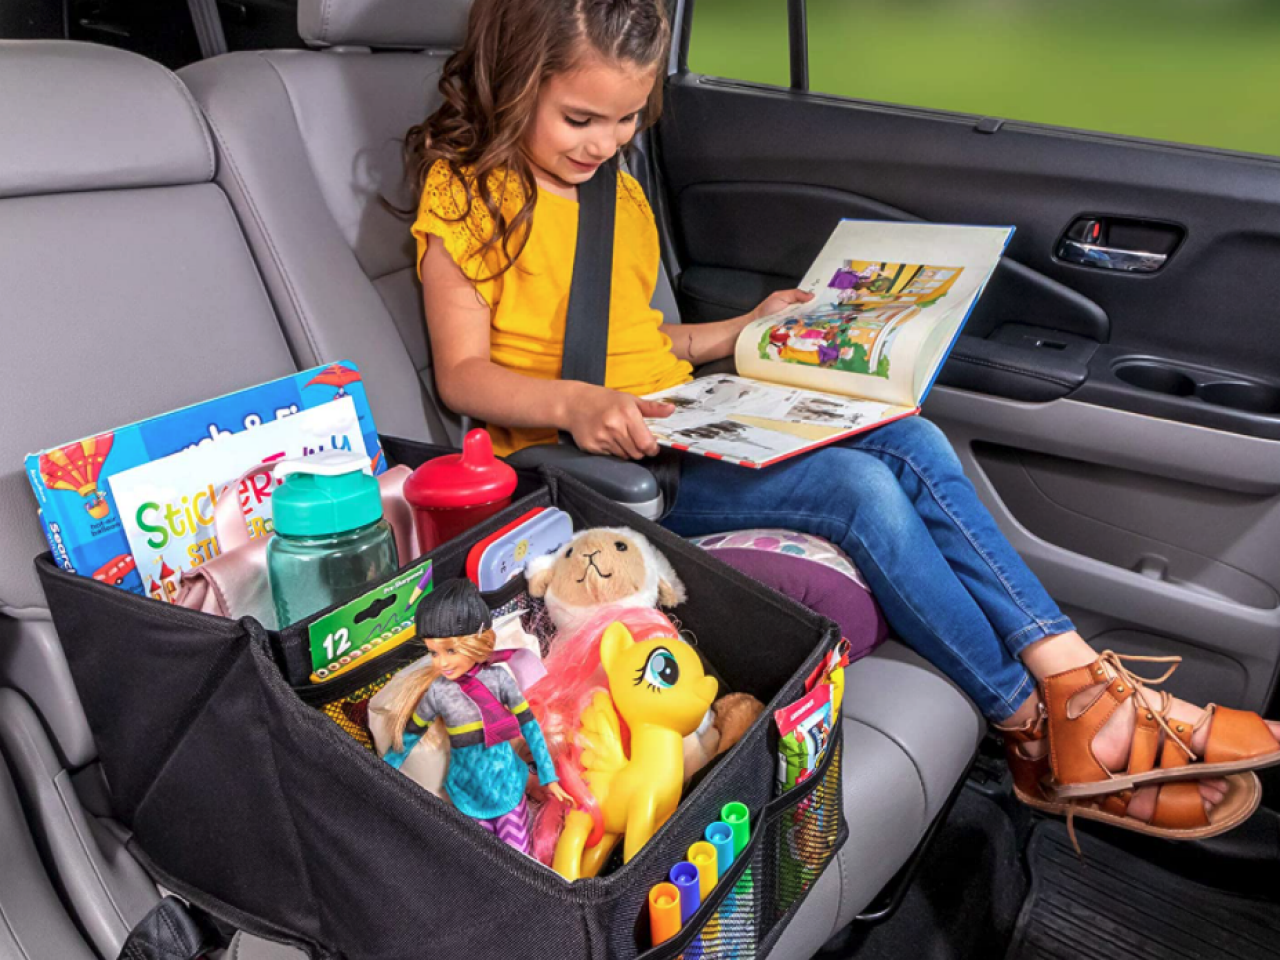 https://hgtvhome.sndimg.com/content/dam/images/hgtv/products/2021/3/9/RX_Amazon_Kids-Backseat-Organizer.png.rend.hgtvcom.1280.960.suffix/1615324154852.png